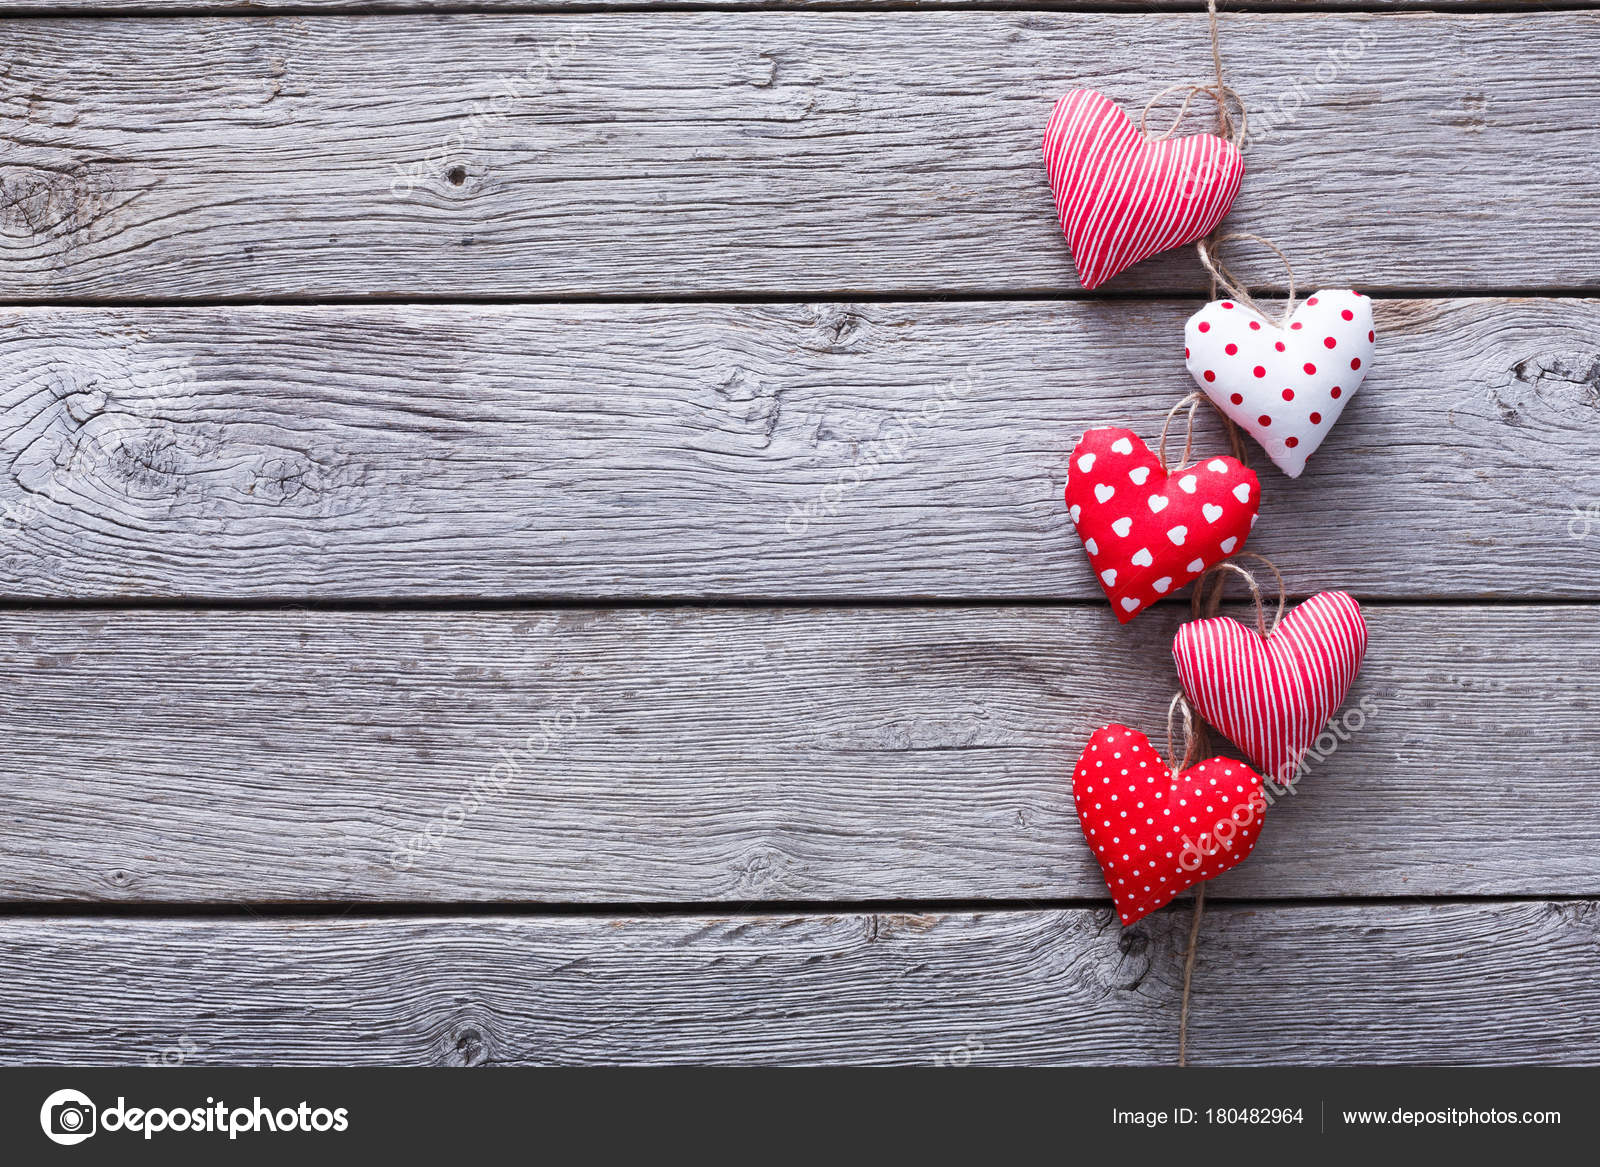 Nice Valentines Day Images | HD Wallpapers